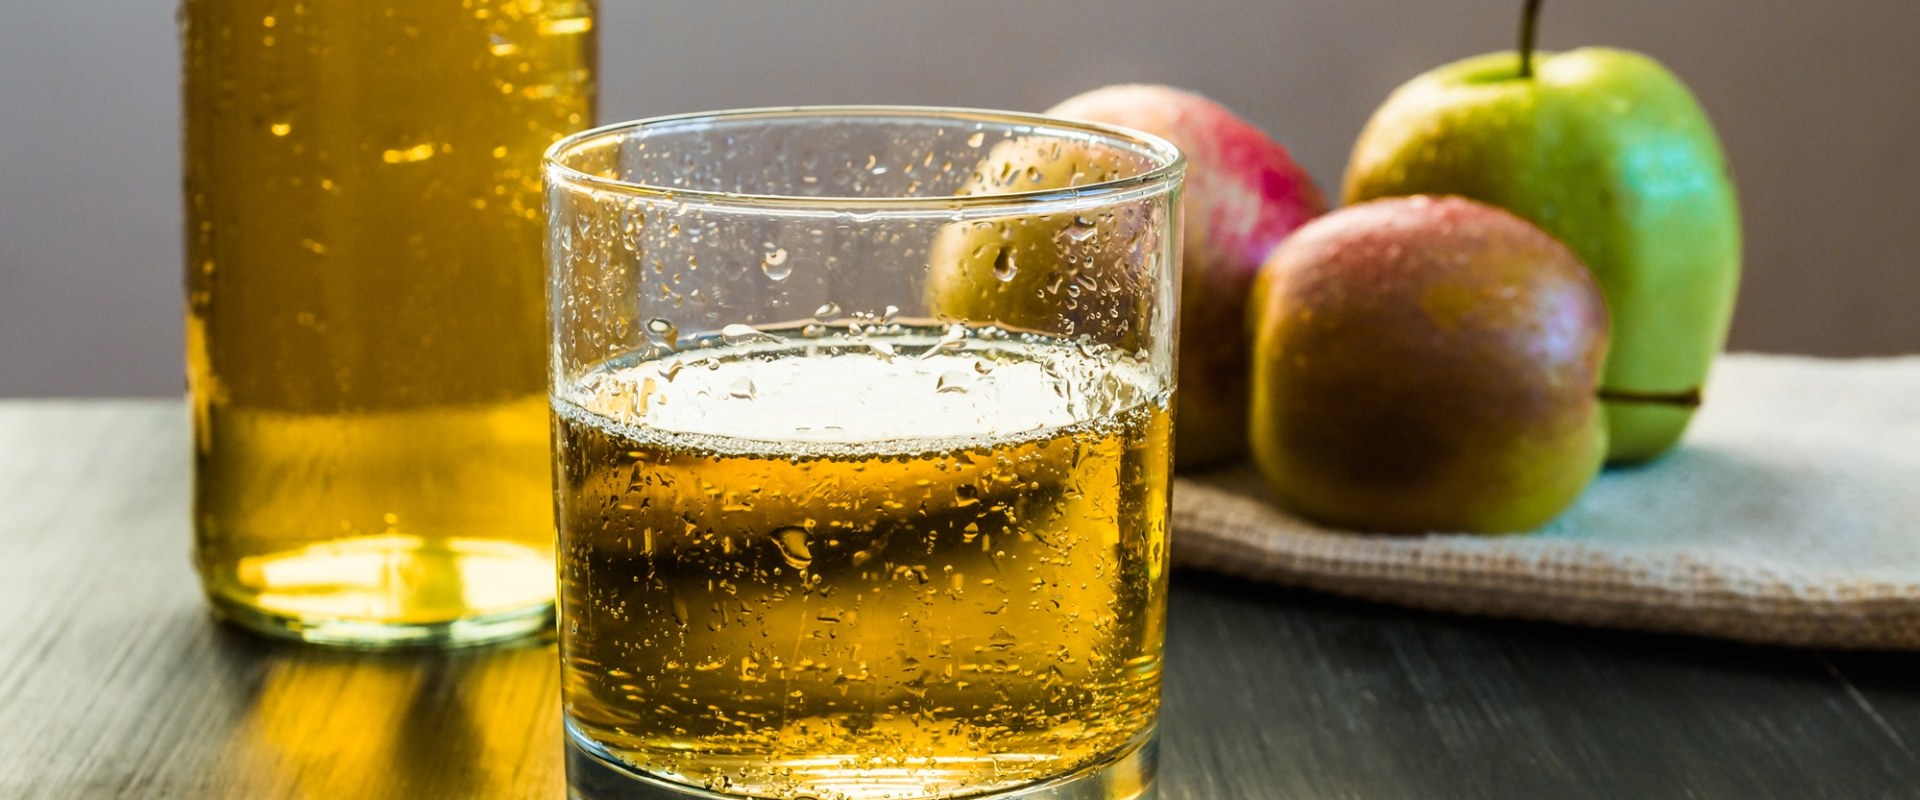 Is a cider a beer?